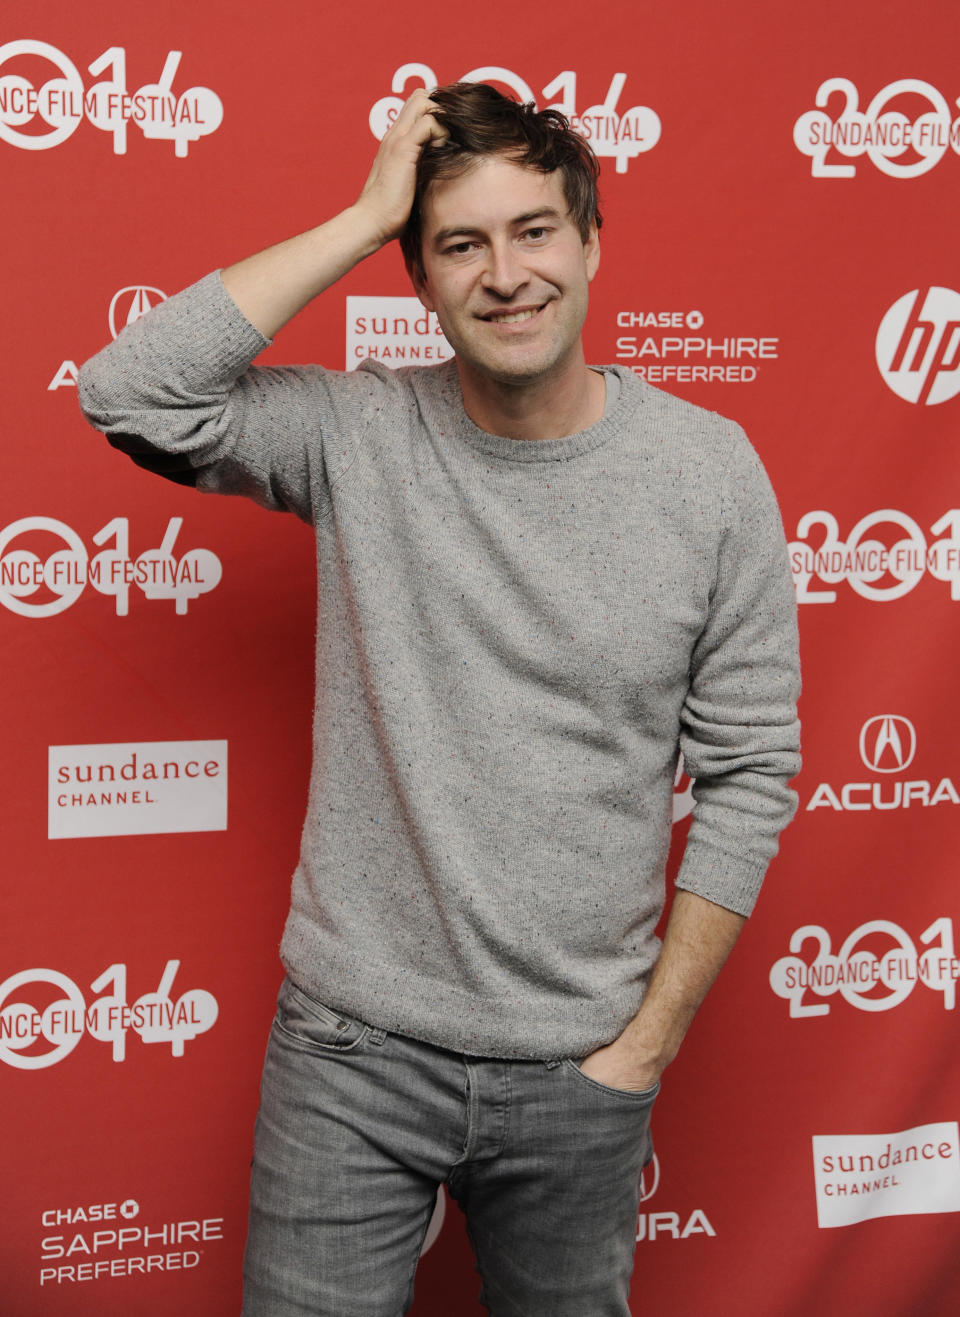 Mark Duplass, a cast member in "The One I Love," poses at the premiere of the film at the 2014 Sundance Film Festival, Tuesday, Jan. 21, 2014, in Park City, Utah. Duplass also served as executive producer of the film. (Photo by Chris Pizzello/Invision/AP)